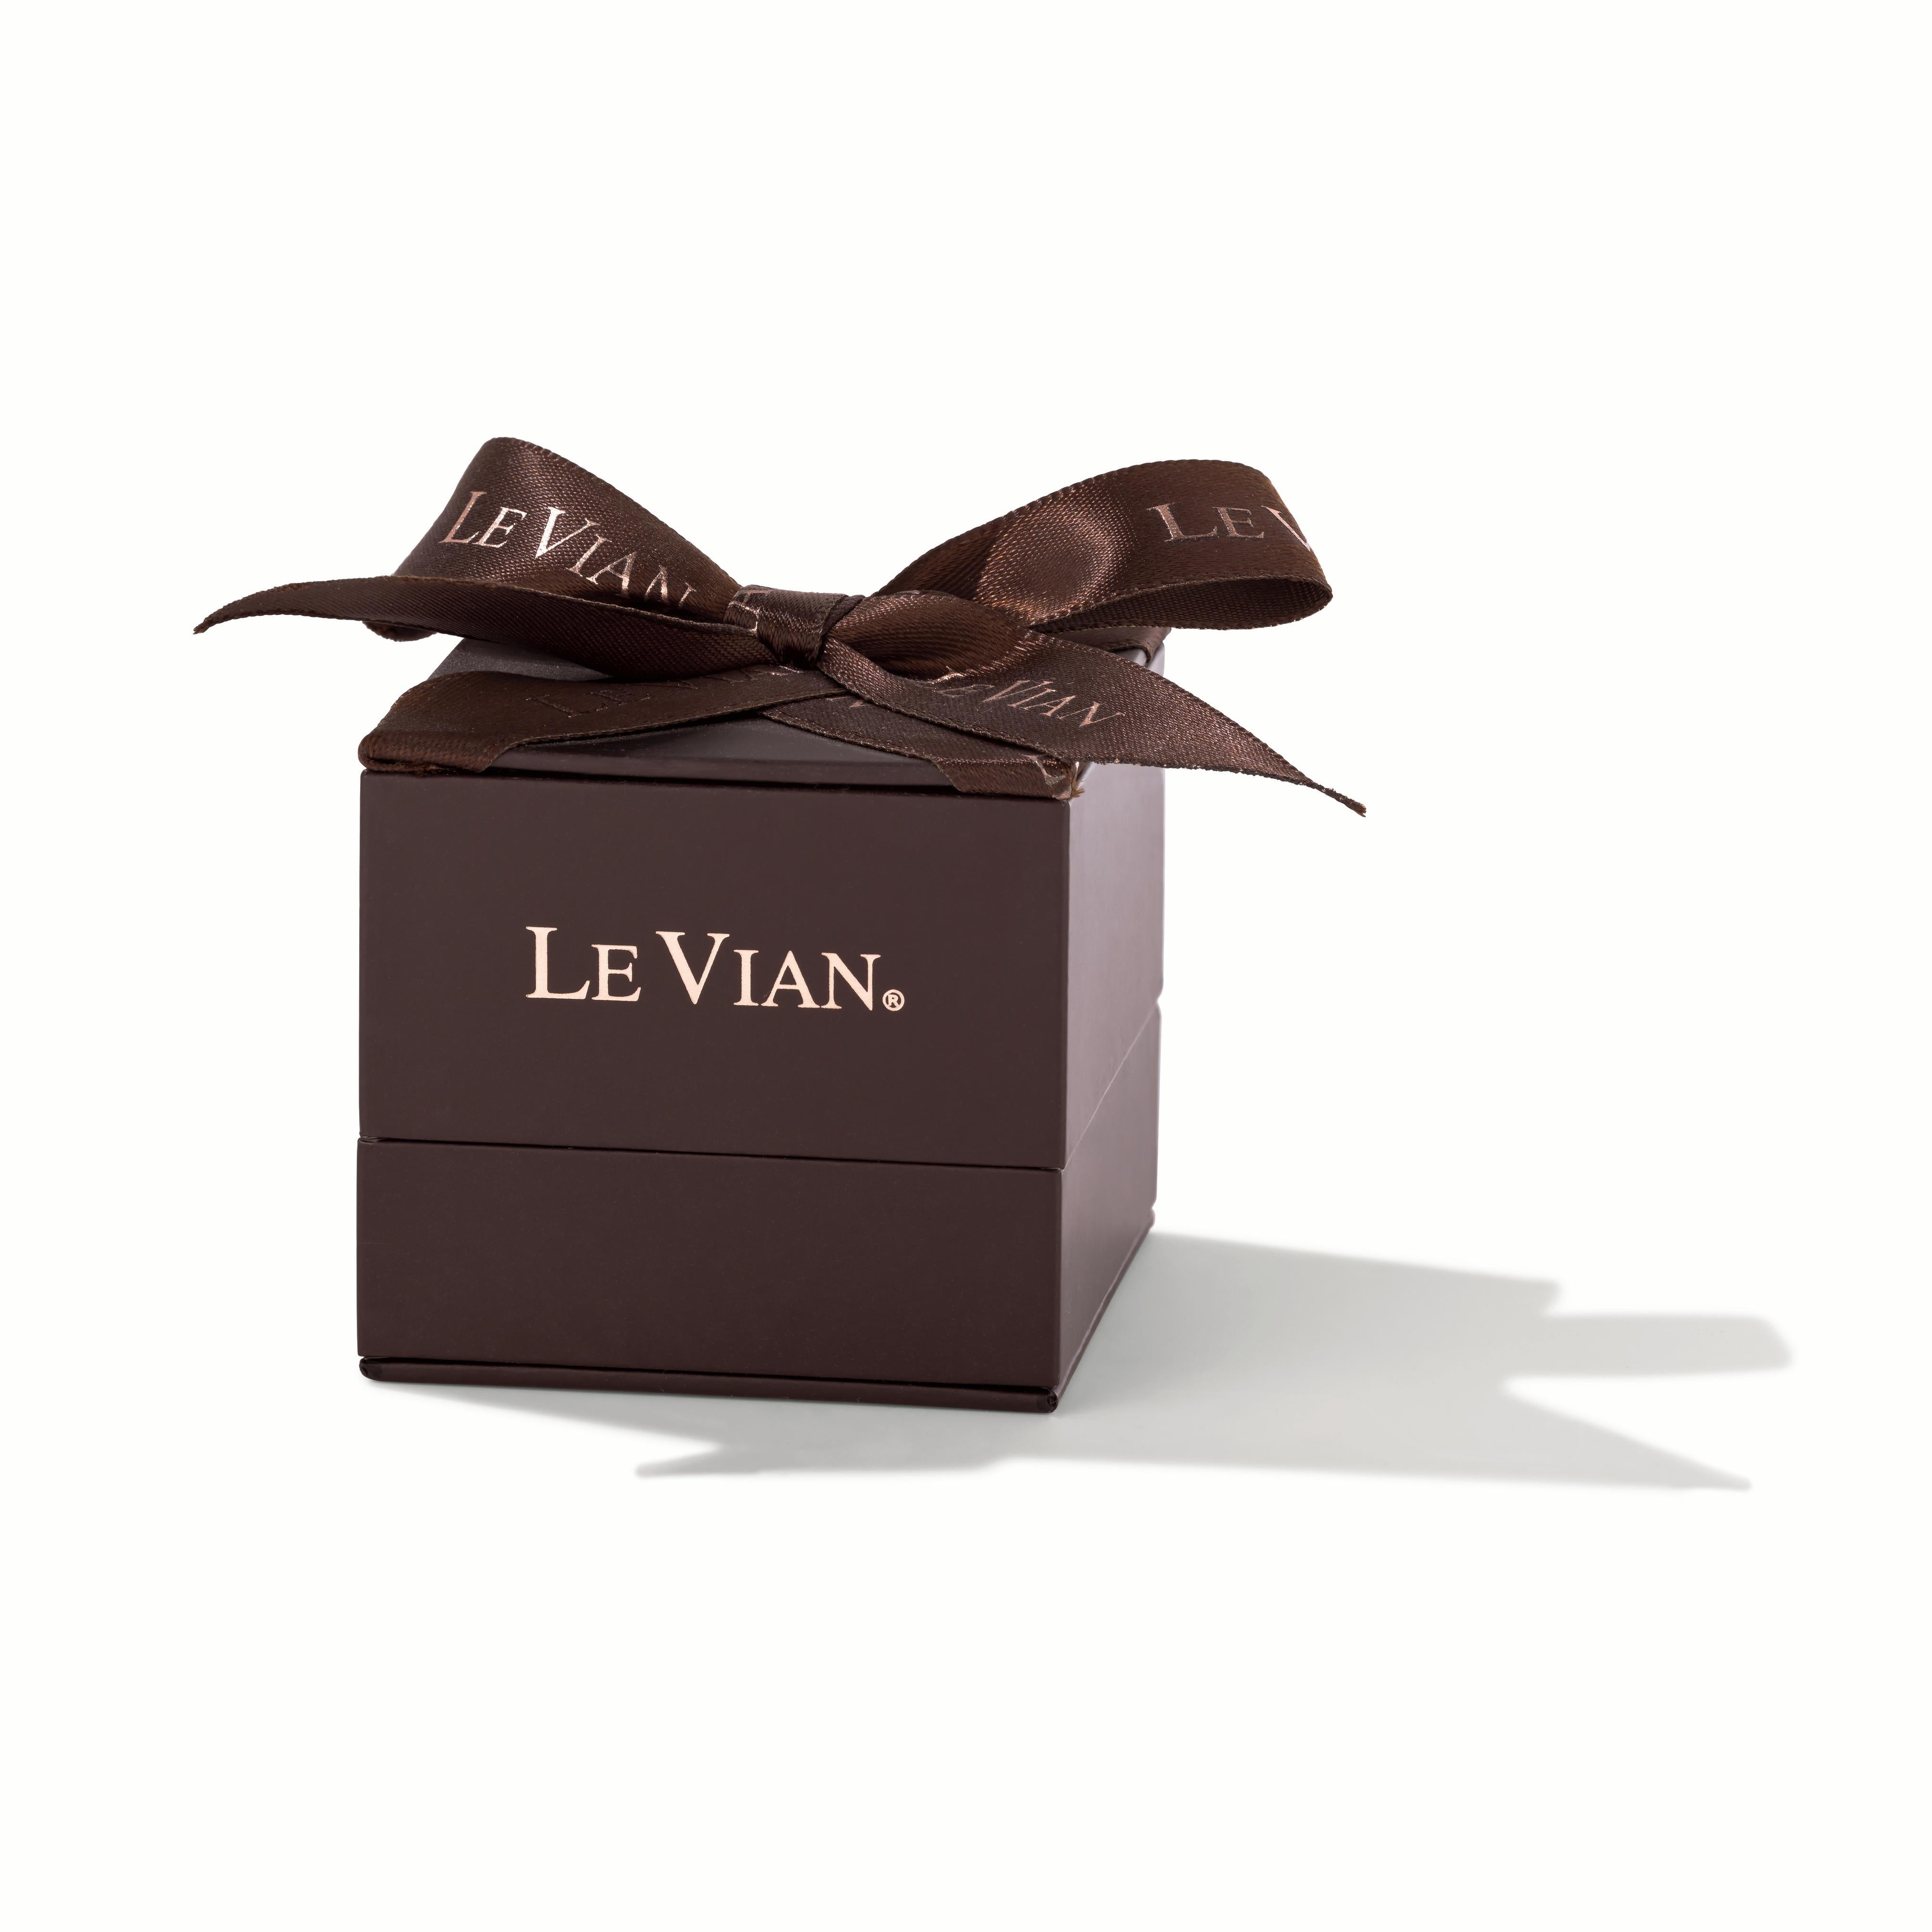 Le Vian® Pendant featuring Chocolate Pearls®, 7/8 cts. Chocolate Diamonds®, 1/8 cts. Vanilla Diamonds® set in 18K Honey Gold™

Diamonds Breakdown:
7/8 cts Brown Diamonds
1/8 cts White Diamonds

Gems Breakdown:
12mm Brown Pearl

Please feel free to